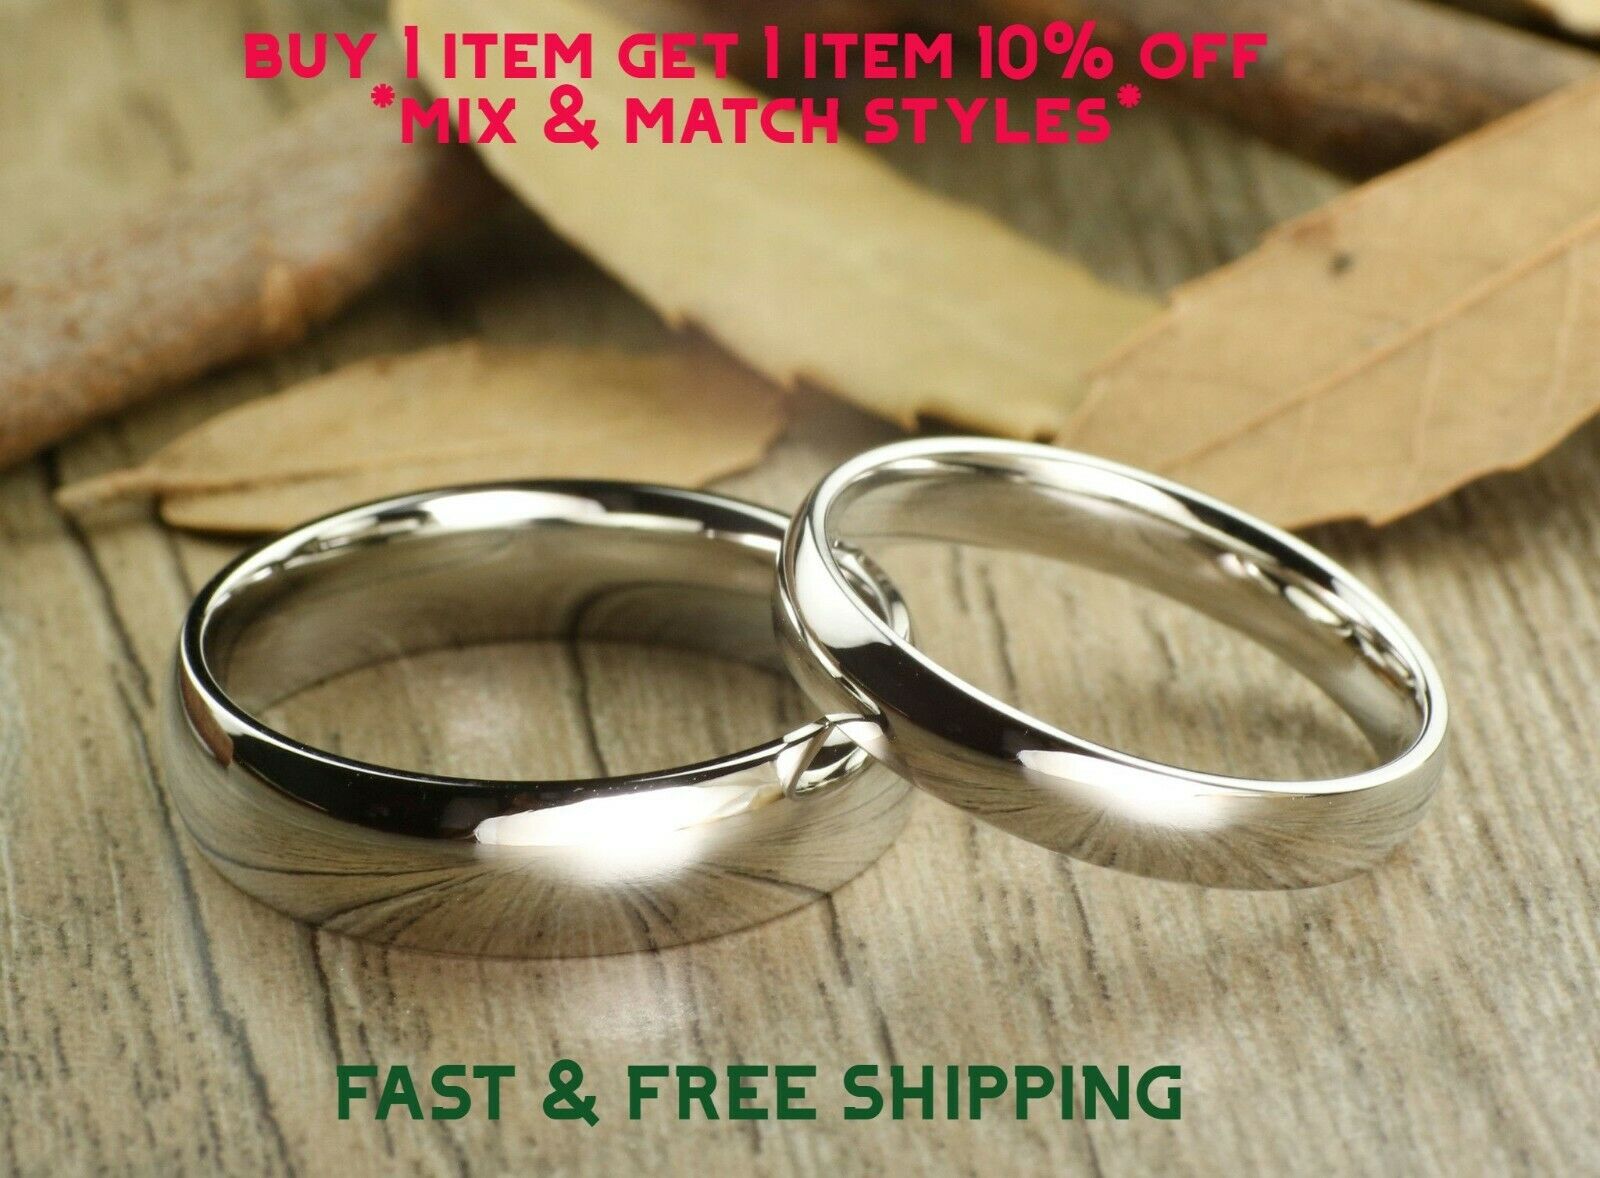 3mm-6mm Silver Stainless Steel Comfort Fit Plain Wedding Band Ring Sizes 5-12